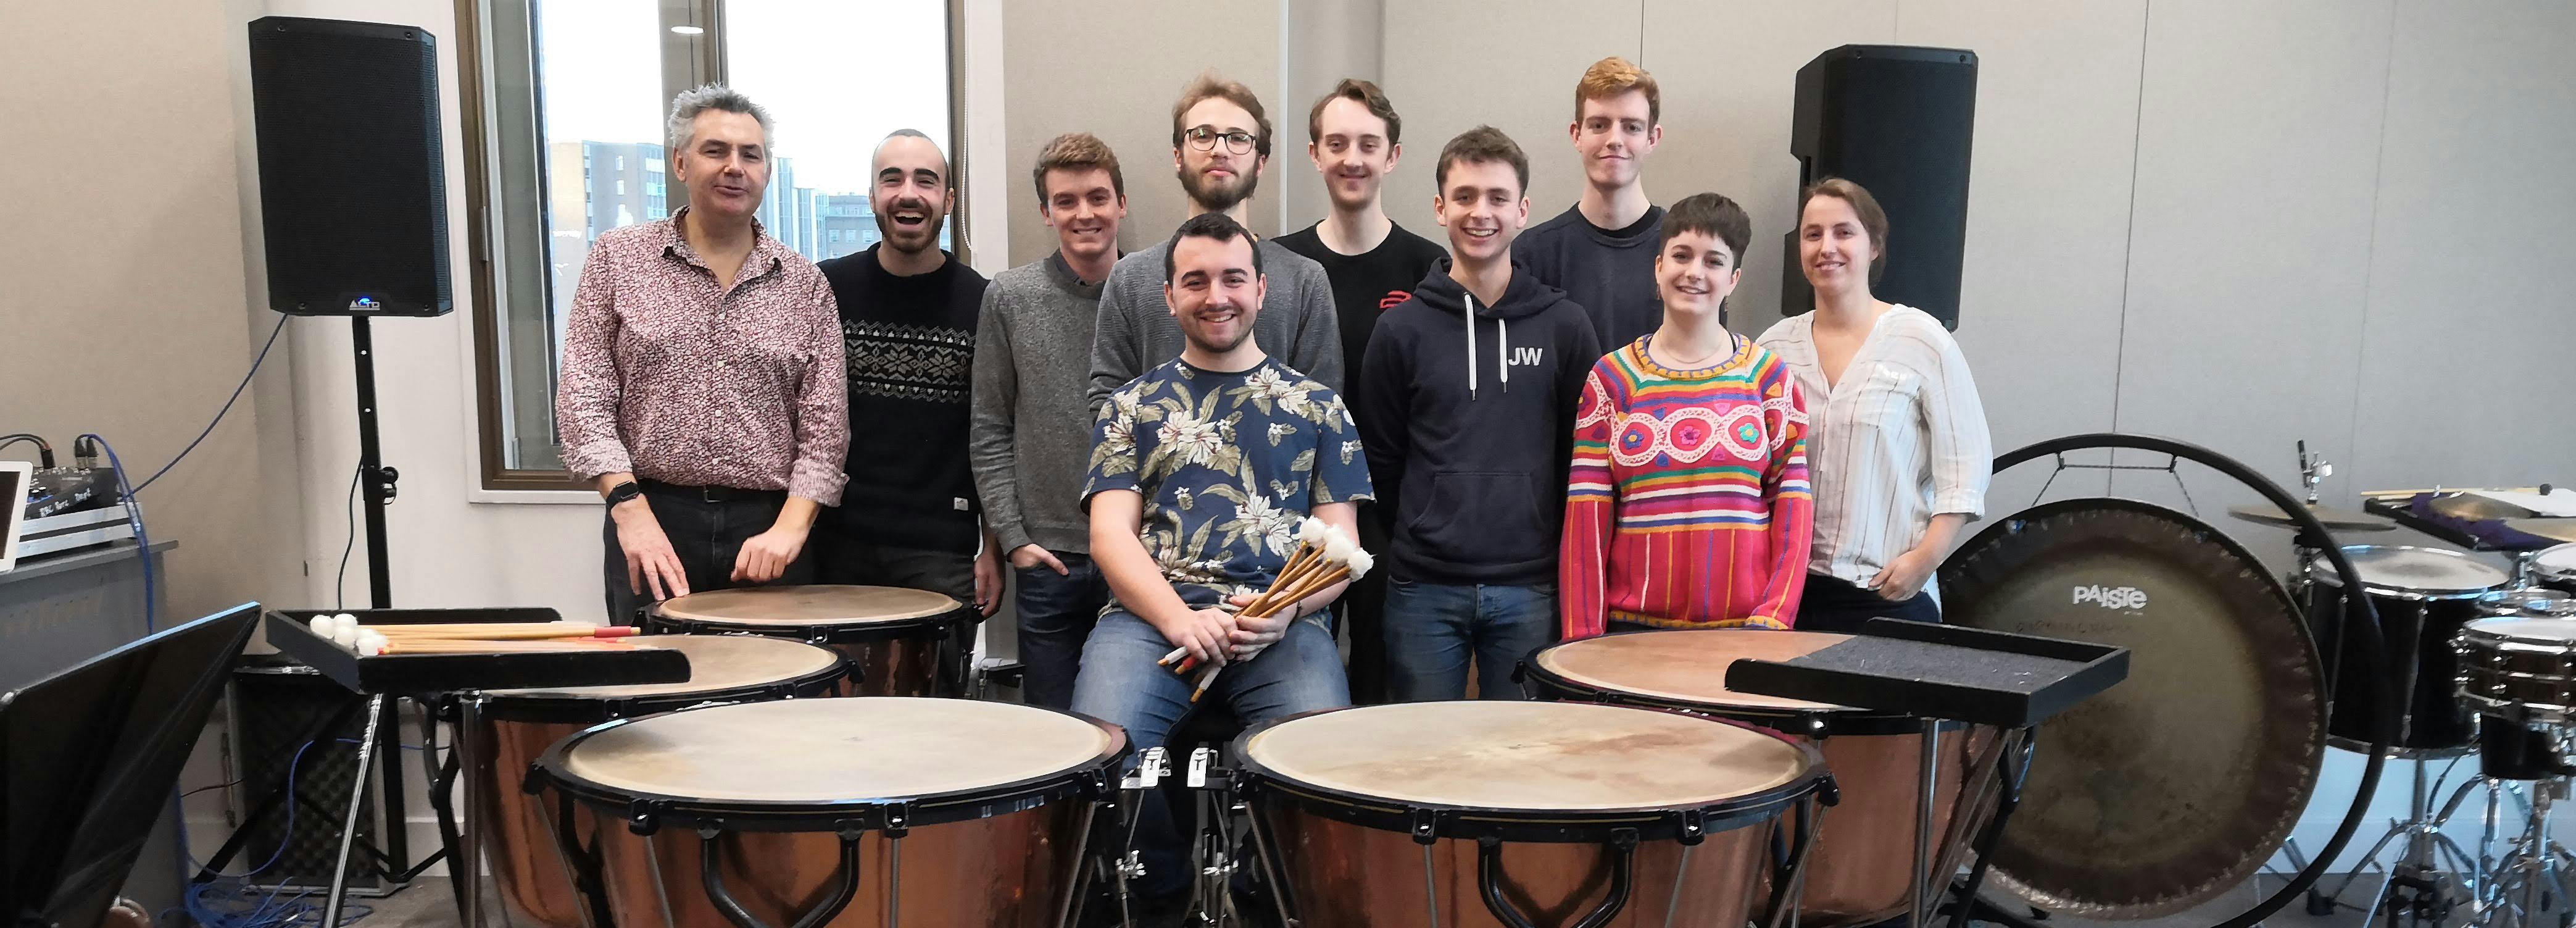 Opera timps masterclass with Dominic Hackett from ENO. Group of percussionists posing behind drums and speakers